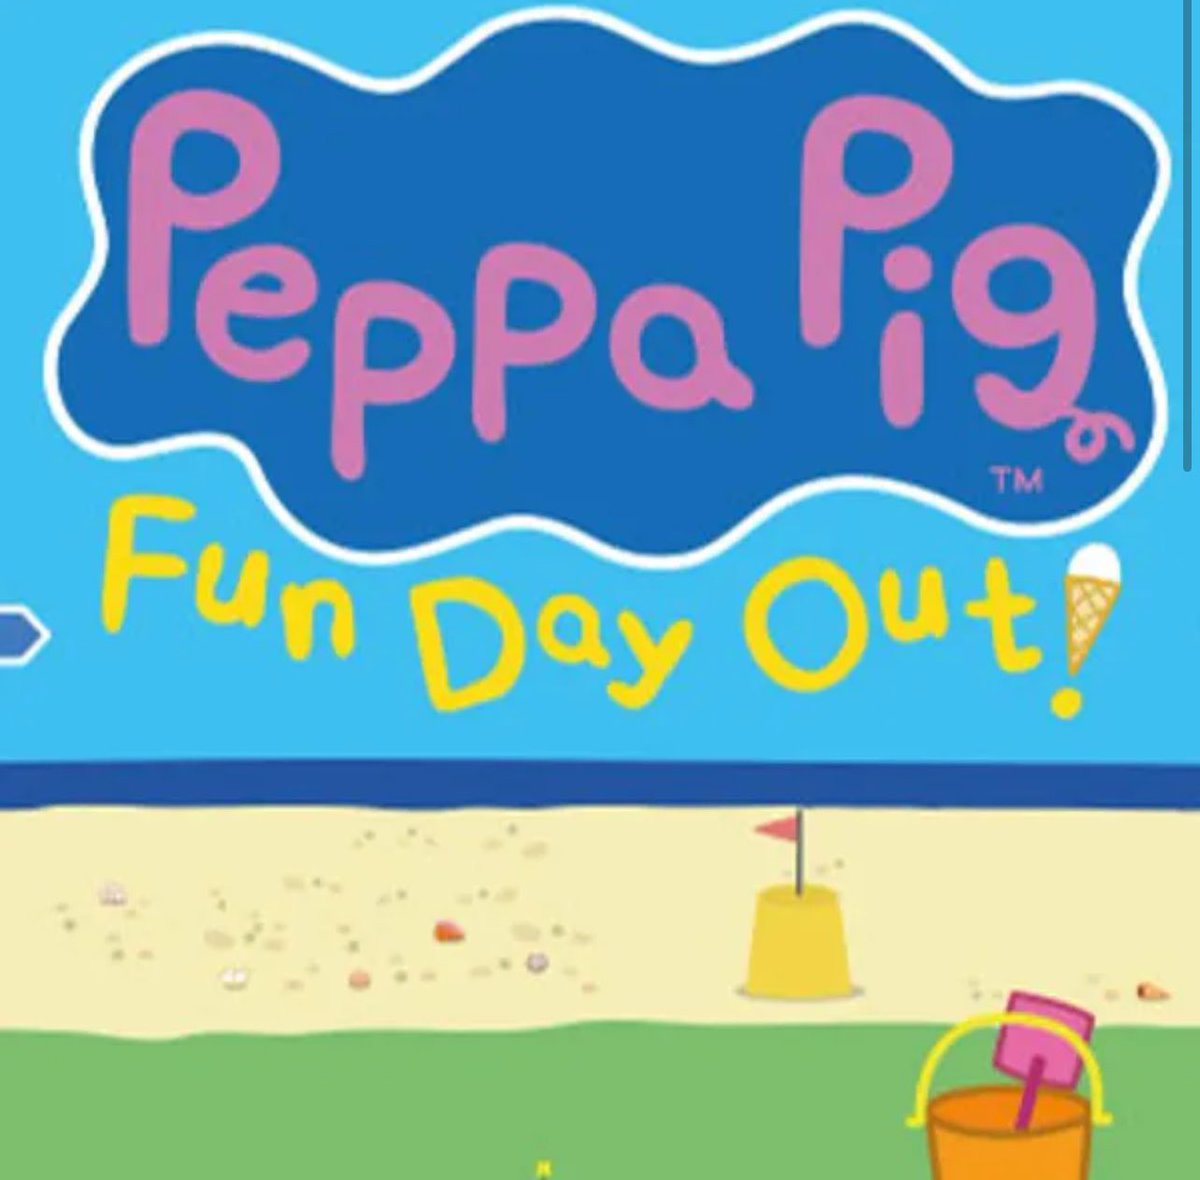 Peppa is currently on an epic tour across the country! Daddy Pig, Mummy Pig, Miss Rabbit, George and more will be joining her along the way.
Book your tickets for Peppa Pig Fun Day
Out at peppapiglive.com
#PeppaPigLive #peppapigliveuk @PeppaPigLiveUK